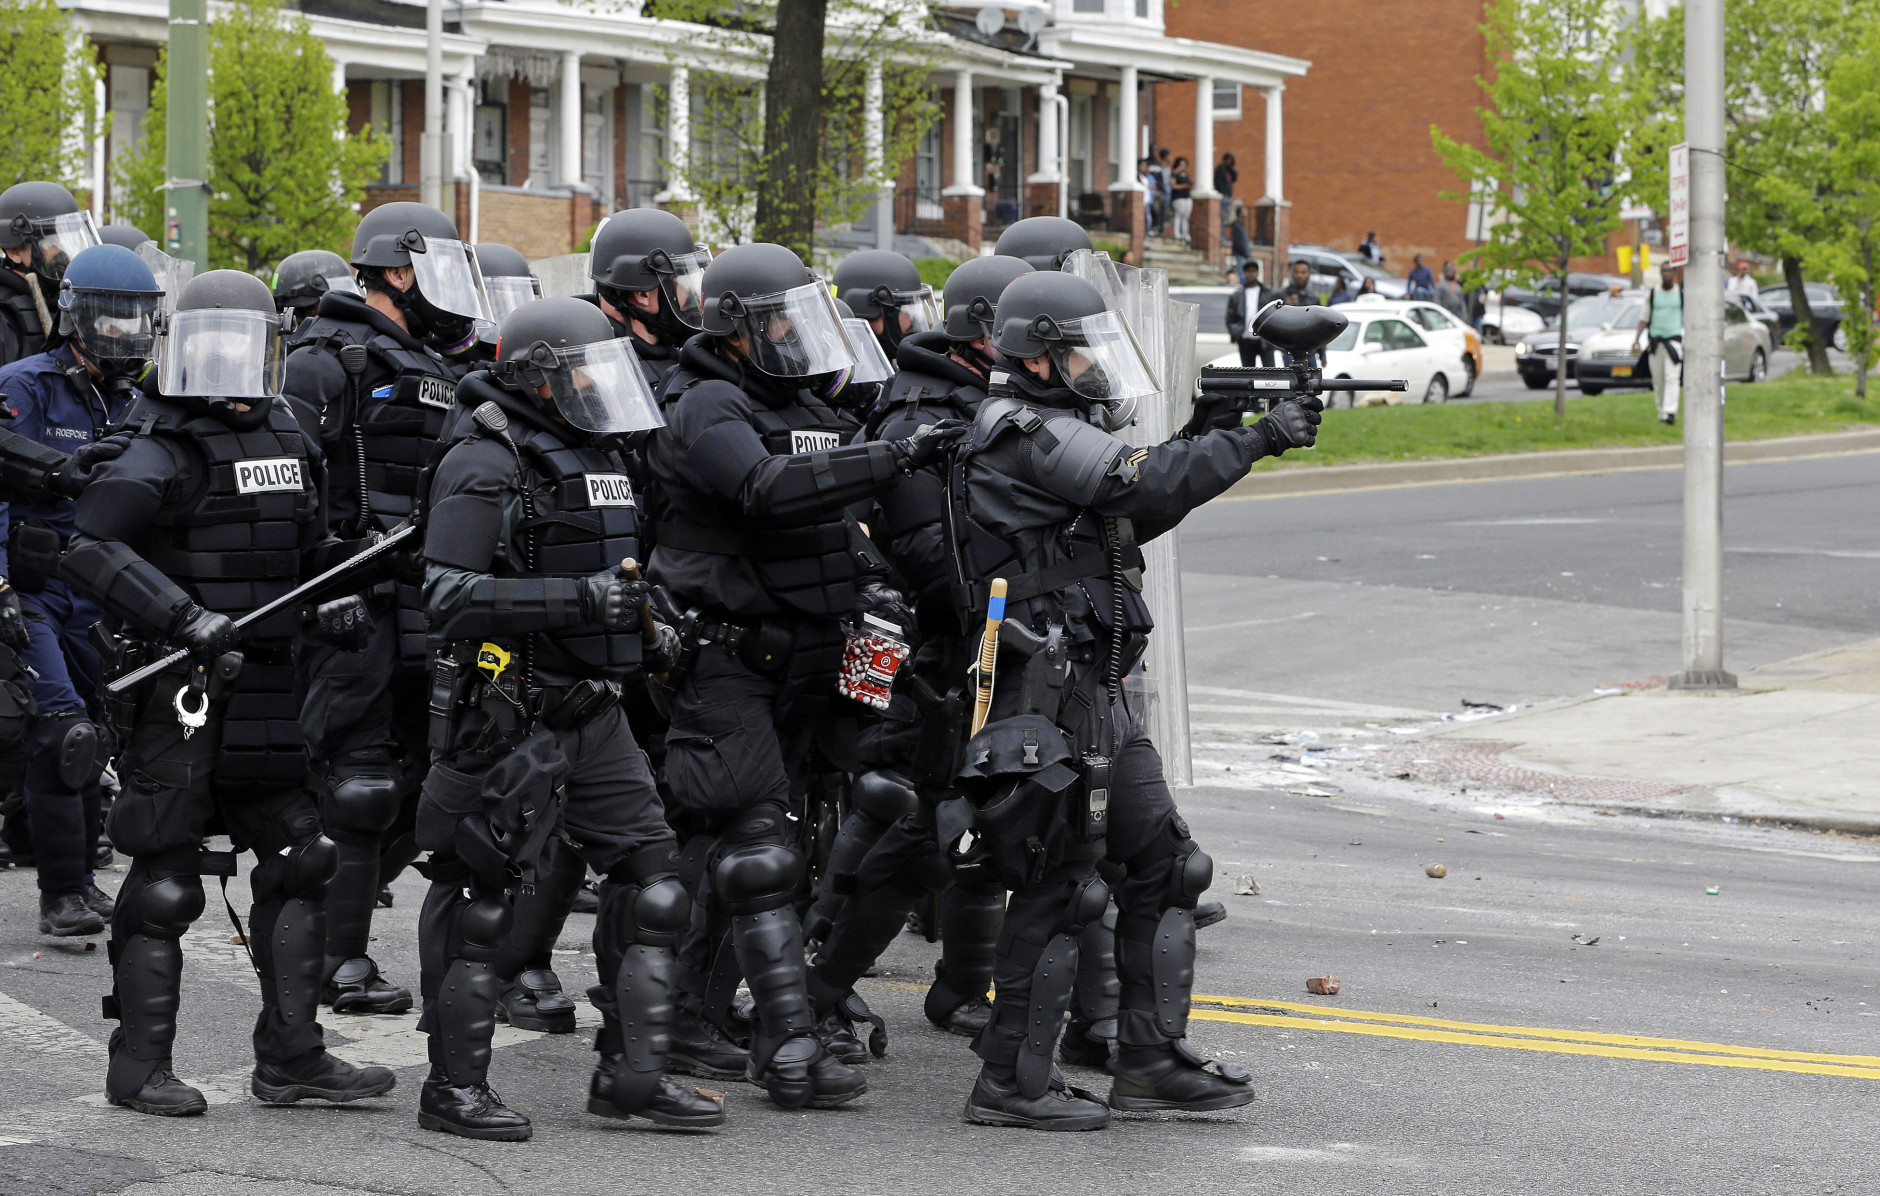 Police move down a street in response to demonstrators who were throwing objects, Monday, April 27, 2015, after the funeral of Freddie Gray in Baltimore. Gray died from spinal injuries about a week after he was arrested and transported in a Baltimore Police Department van. (AP Photo/Patrick Semansky)